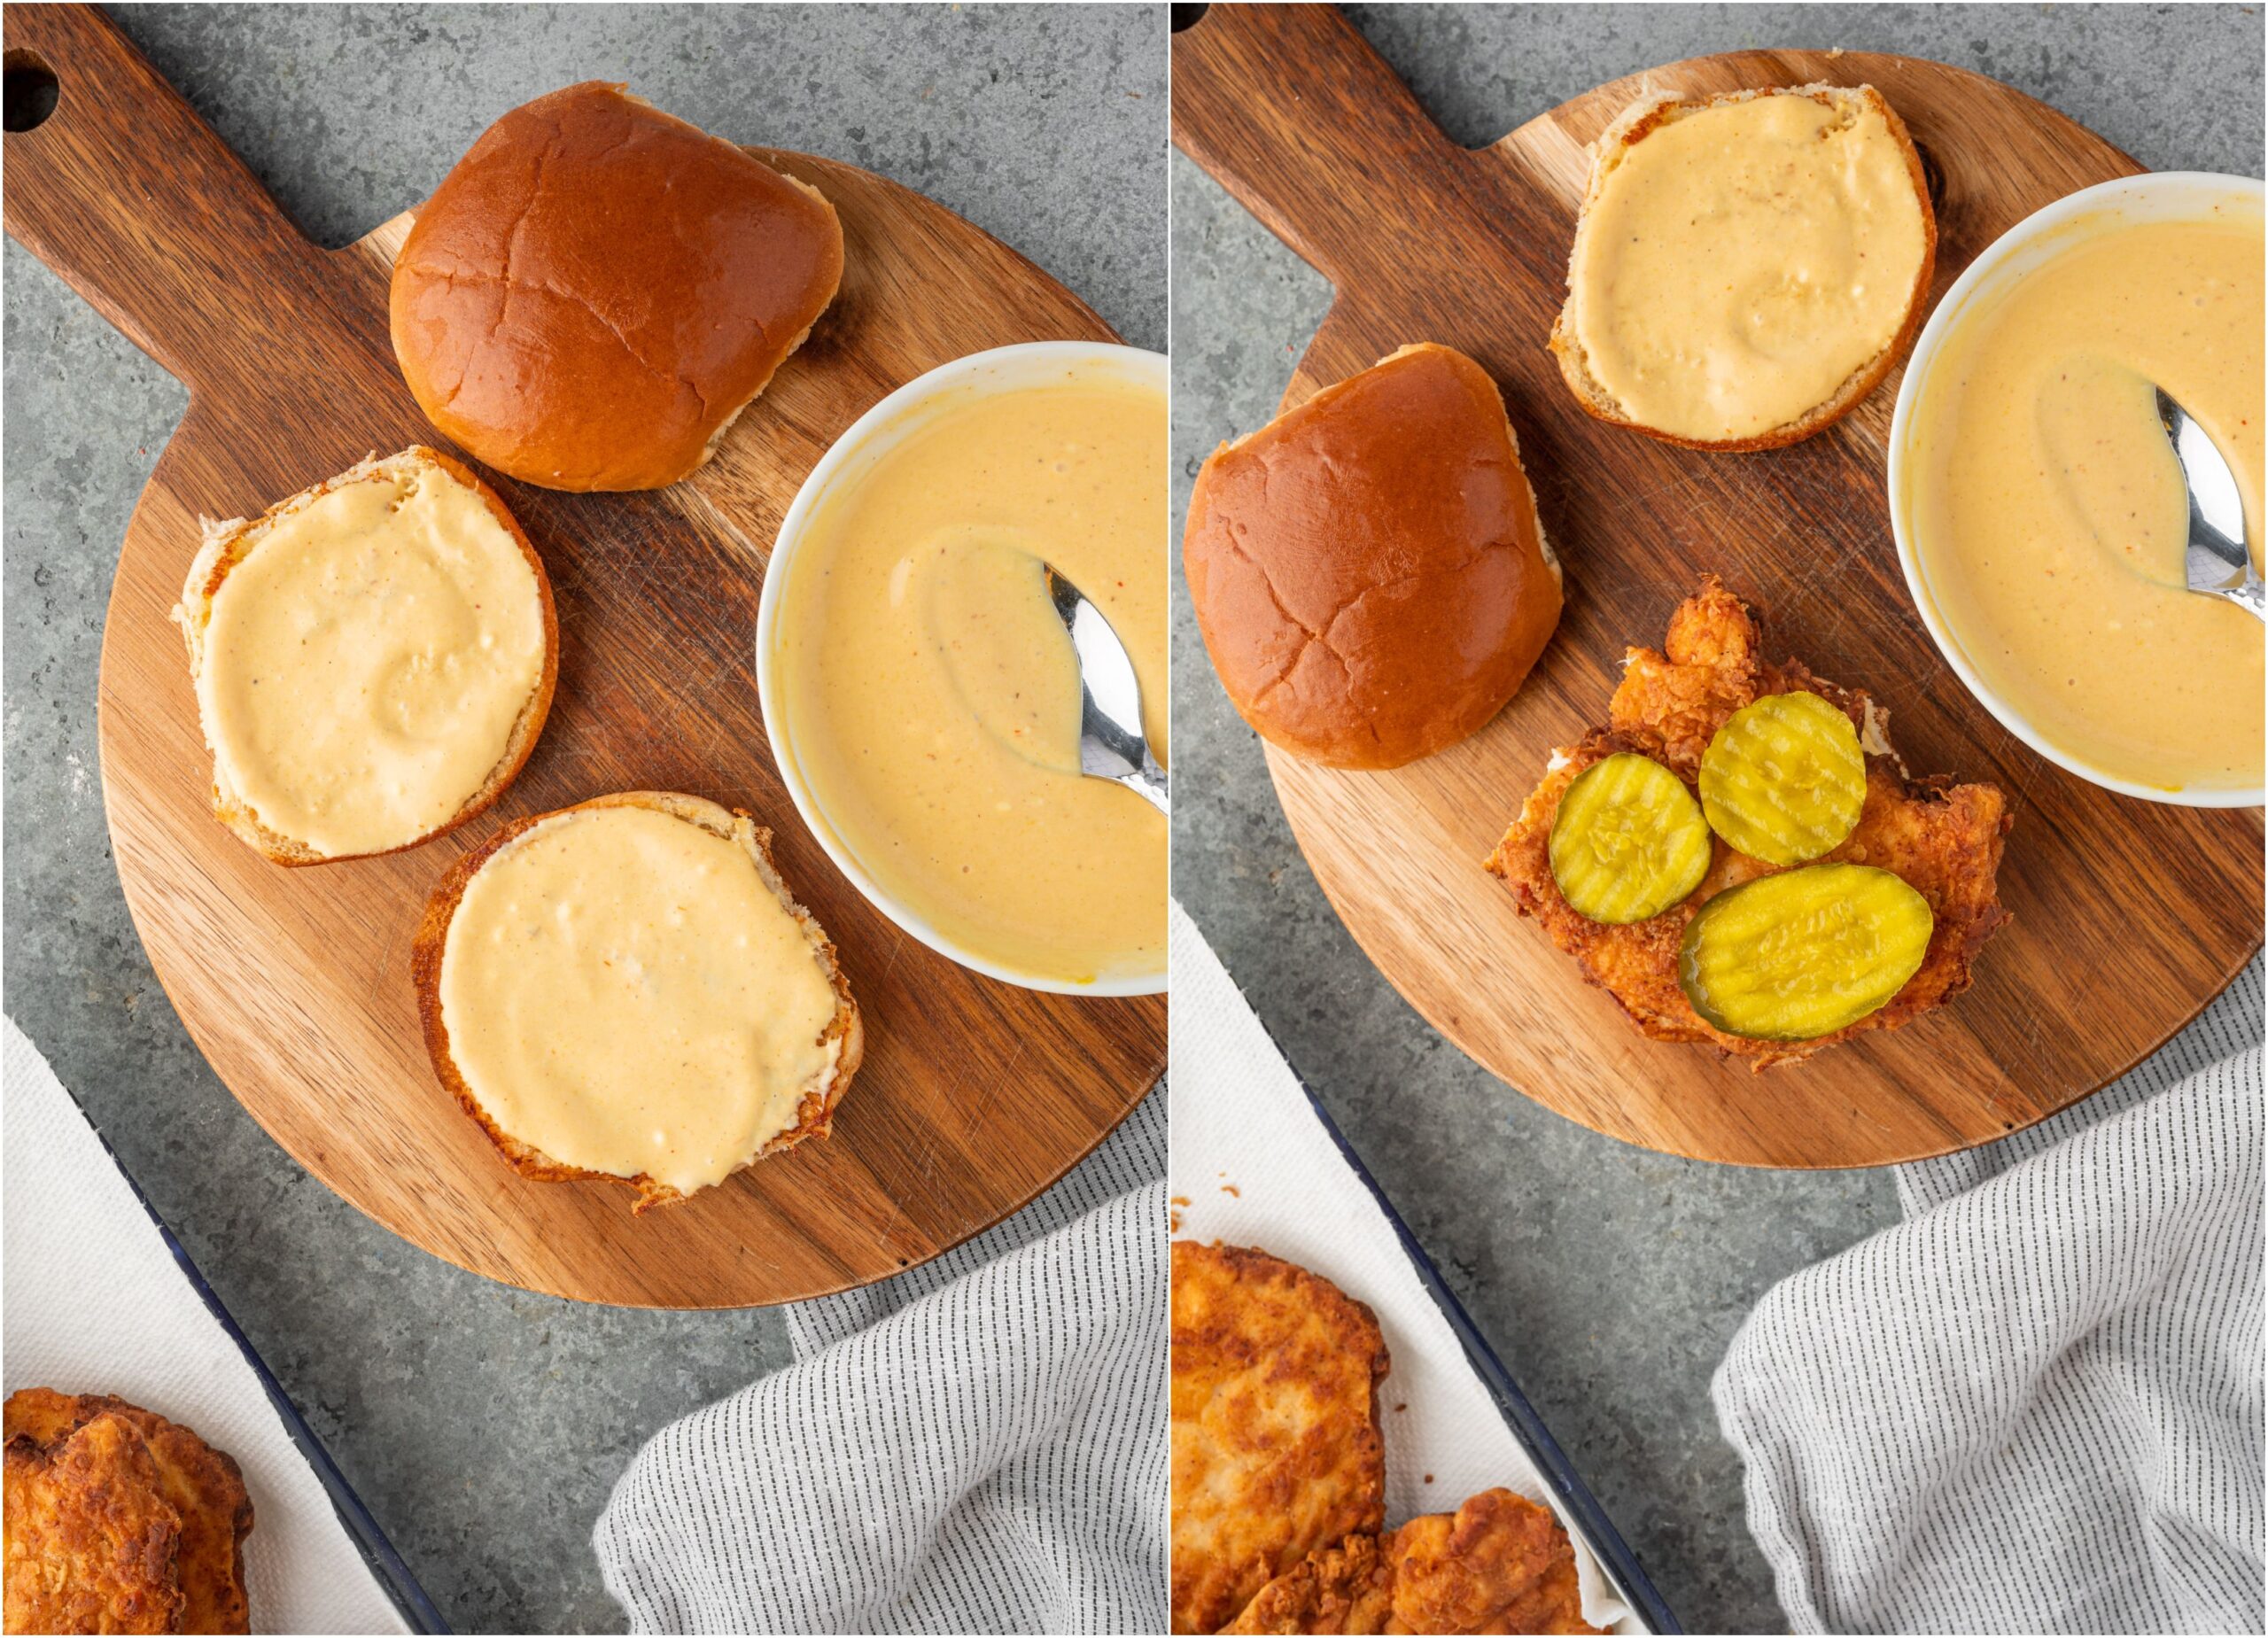 Serving Chick Fil A crispy chicken sandwiches with sauce and dill pickle chips.